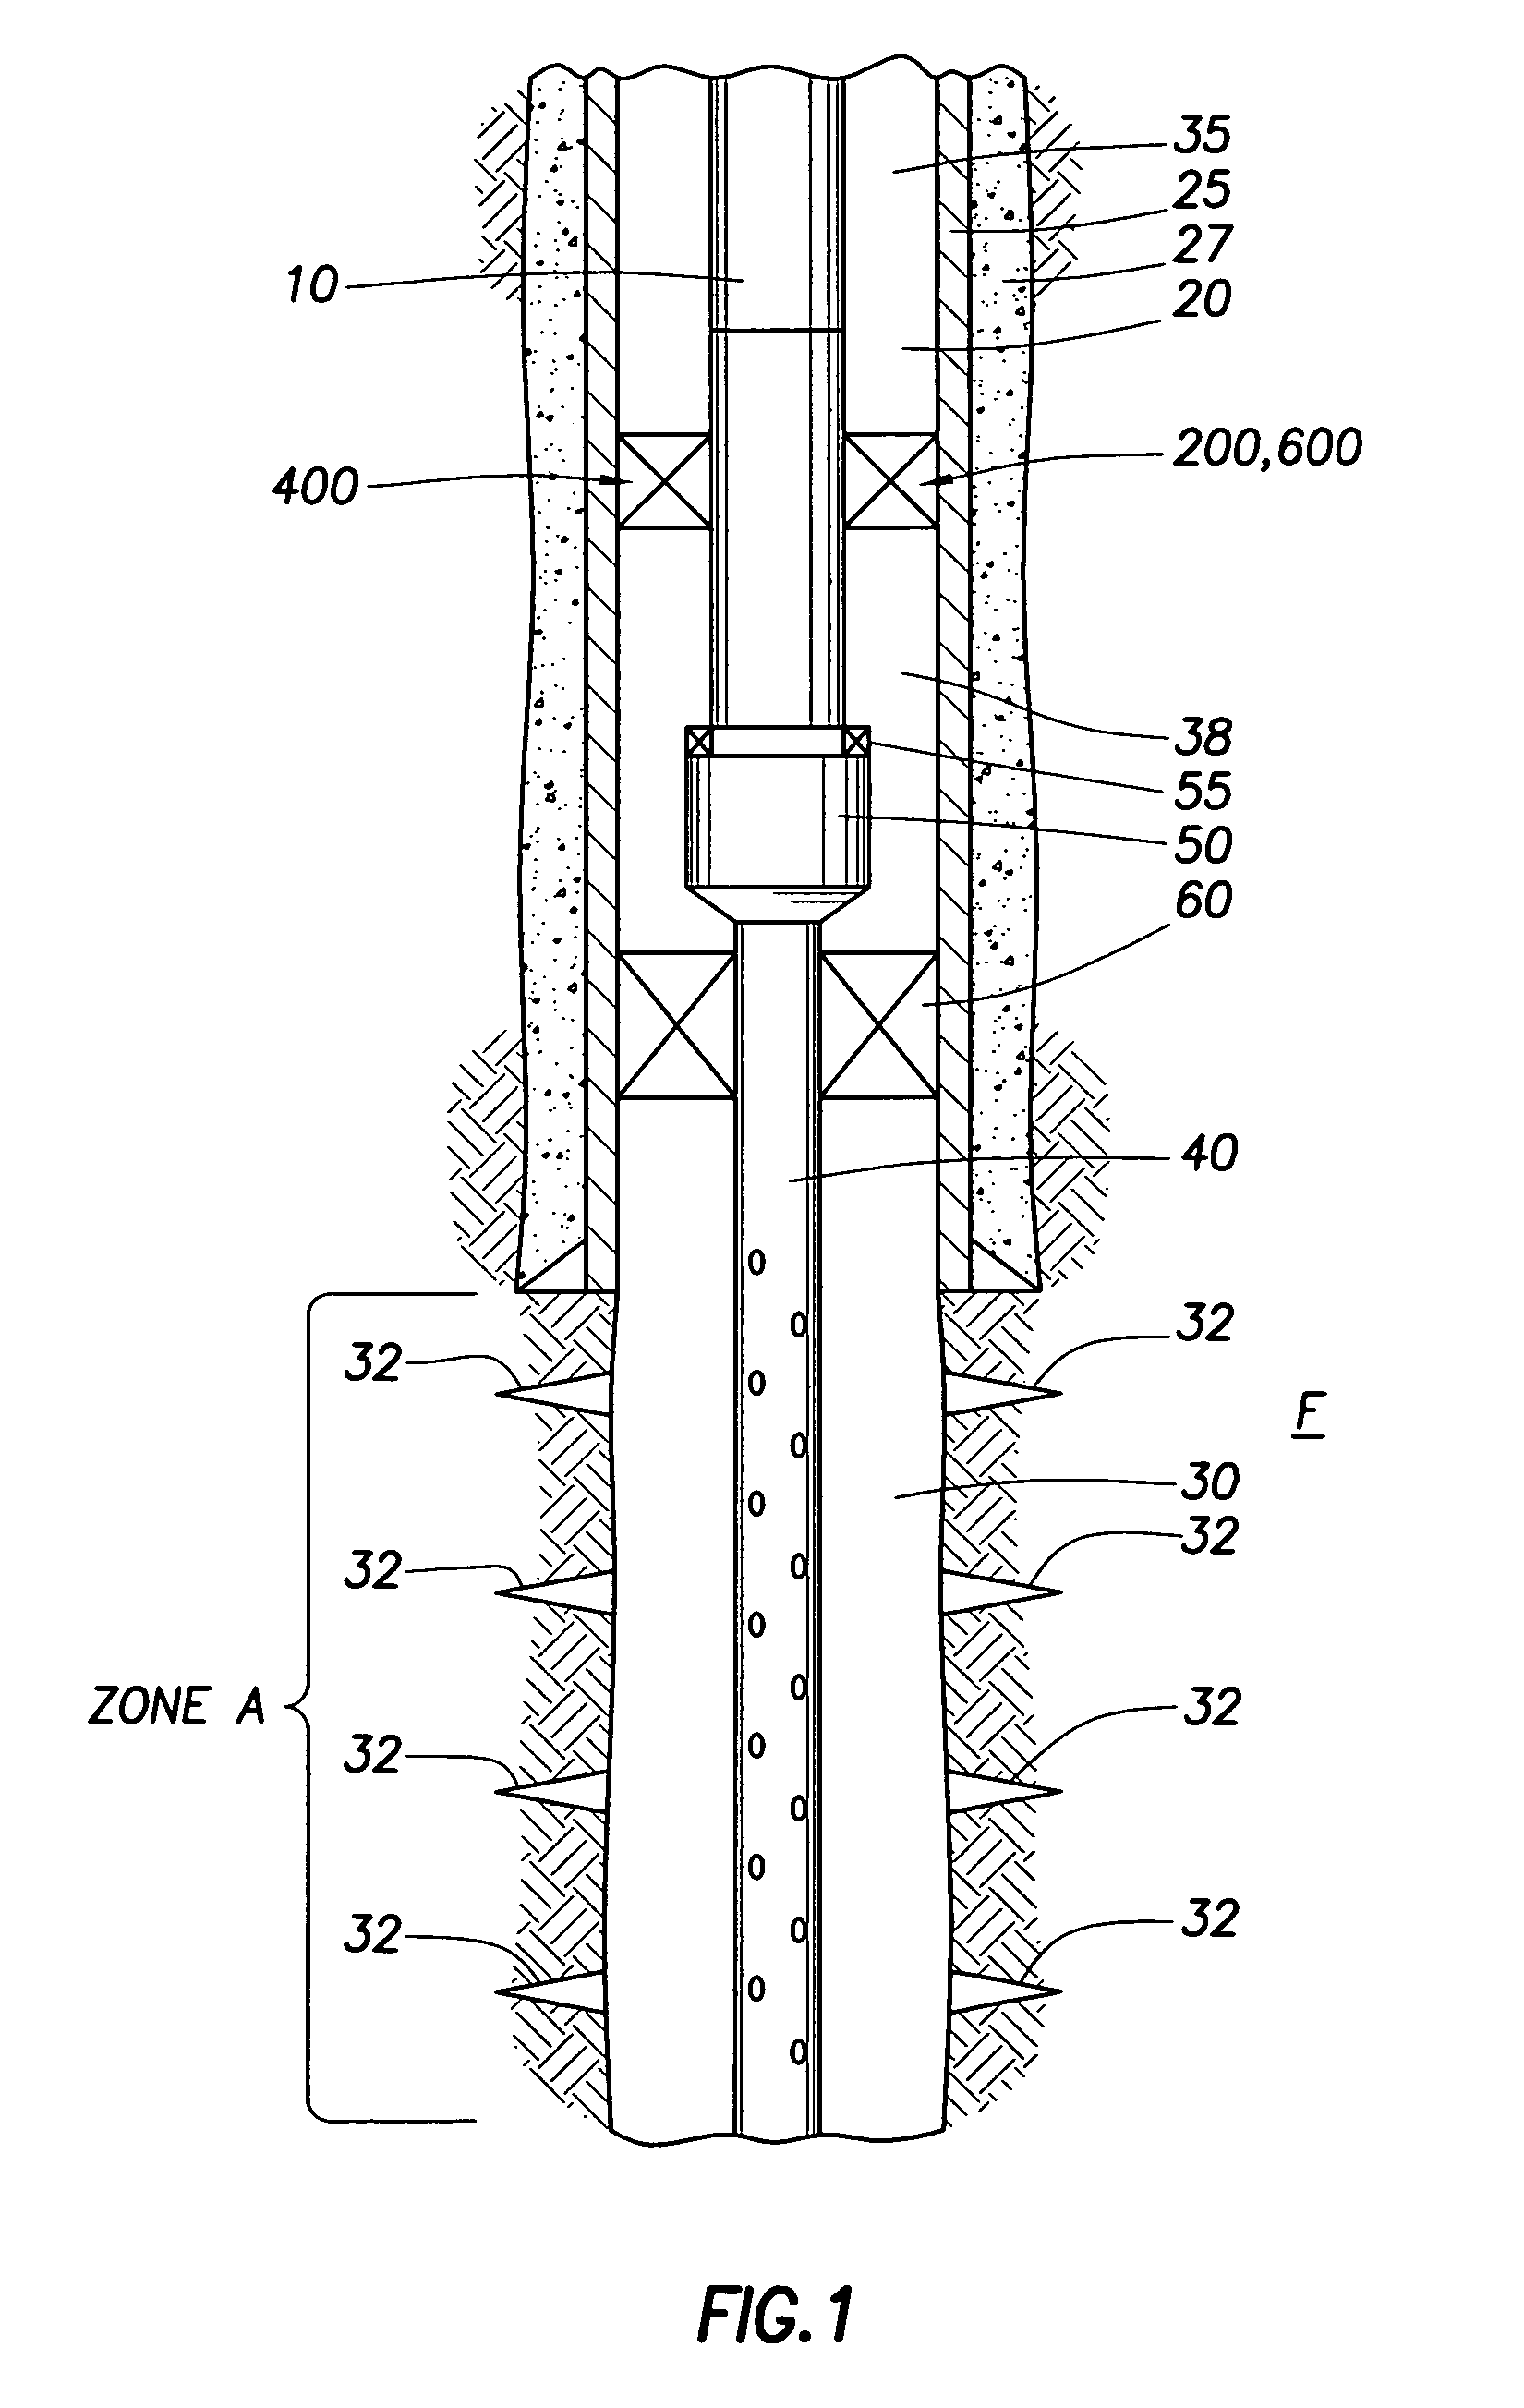 Top-down hydrostatic actuating module for downhole tools